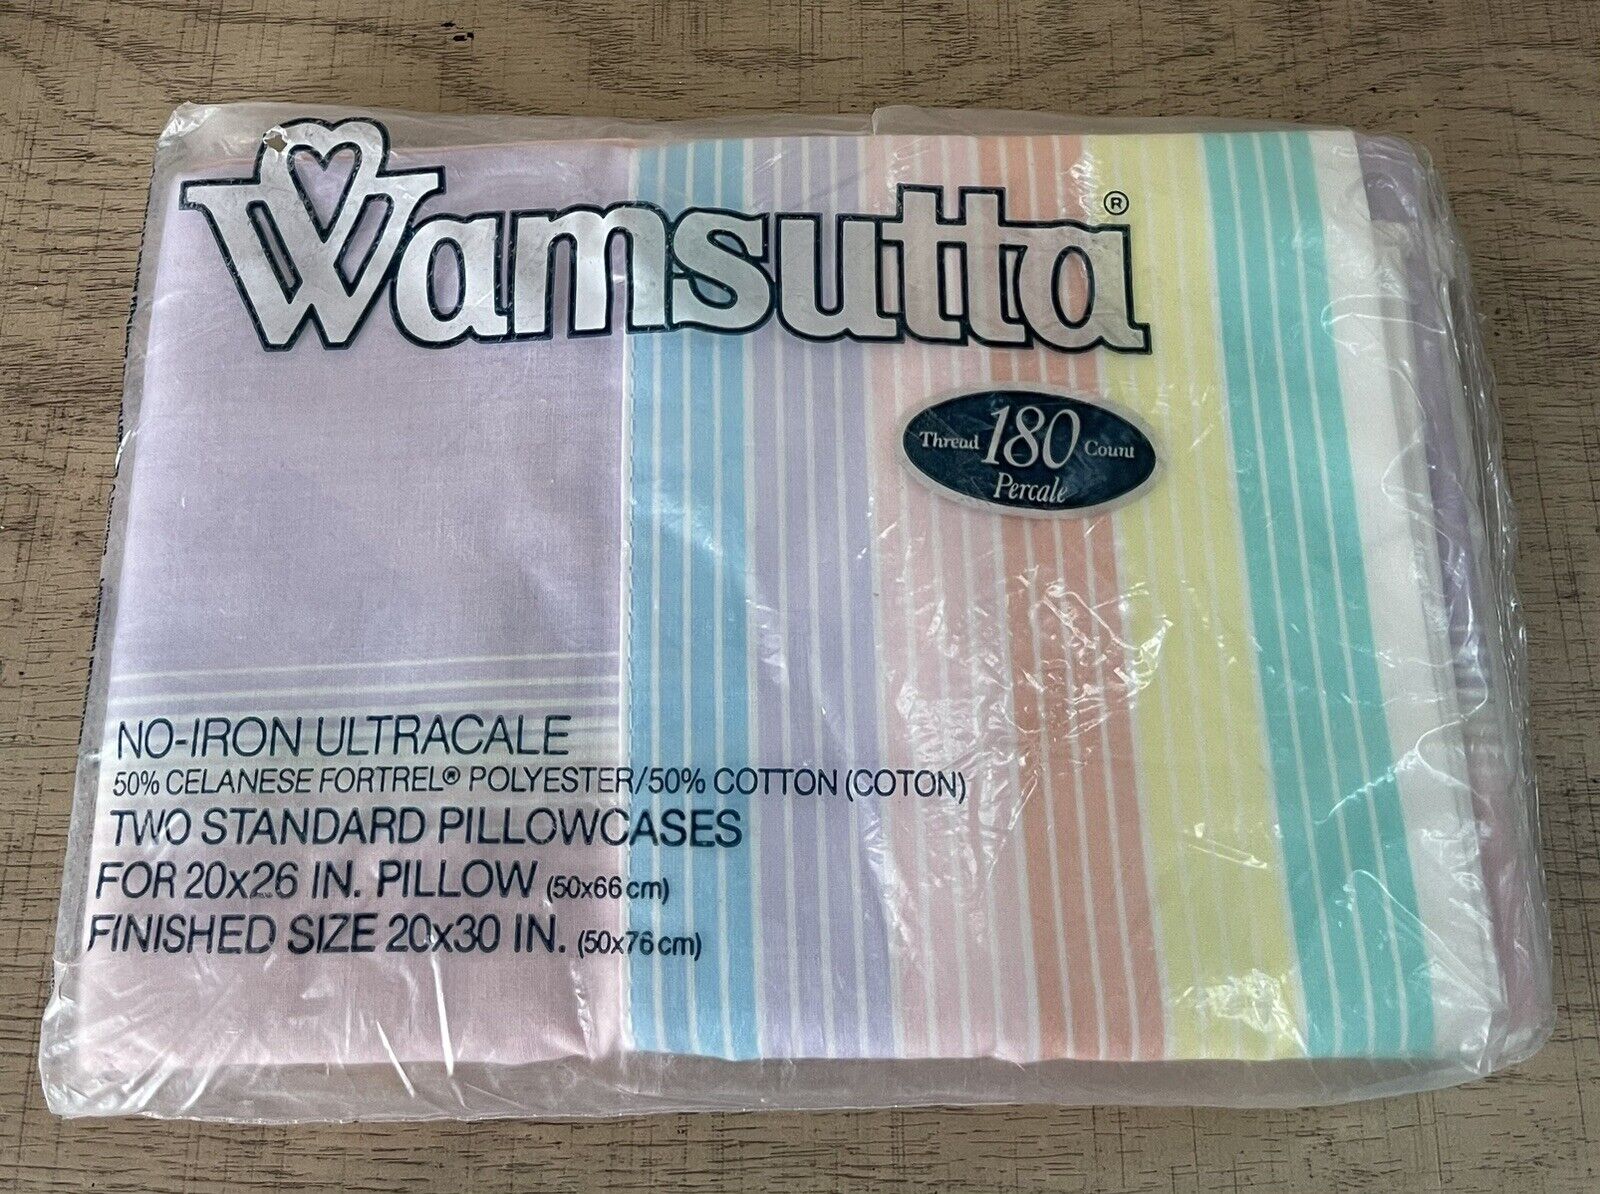 Vintage 1970s 80s Pillowcases Wamsutta Ultracale Standard New Old Stock